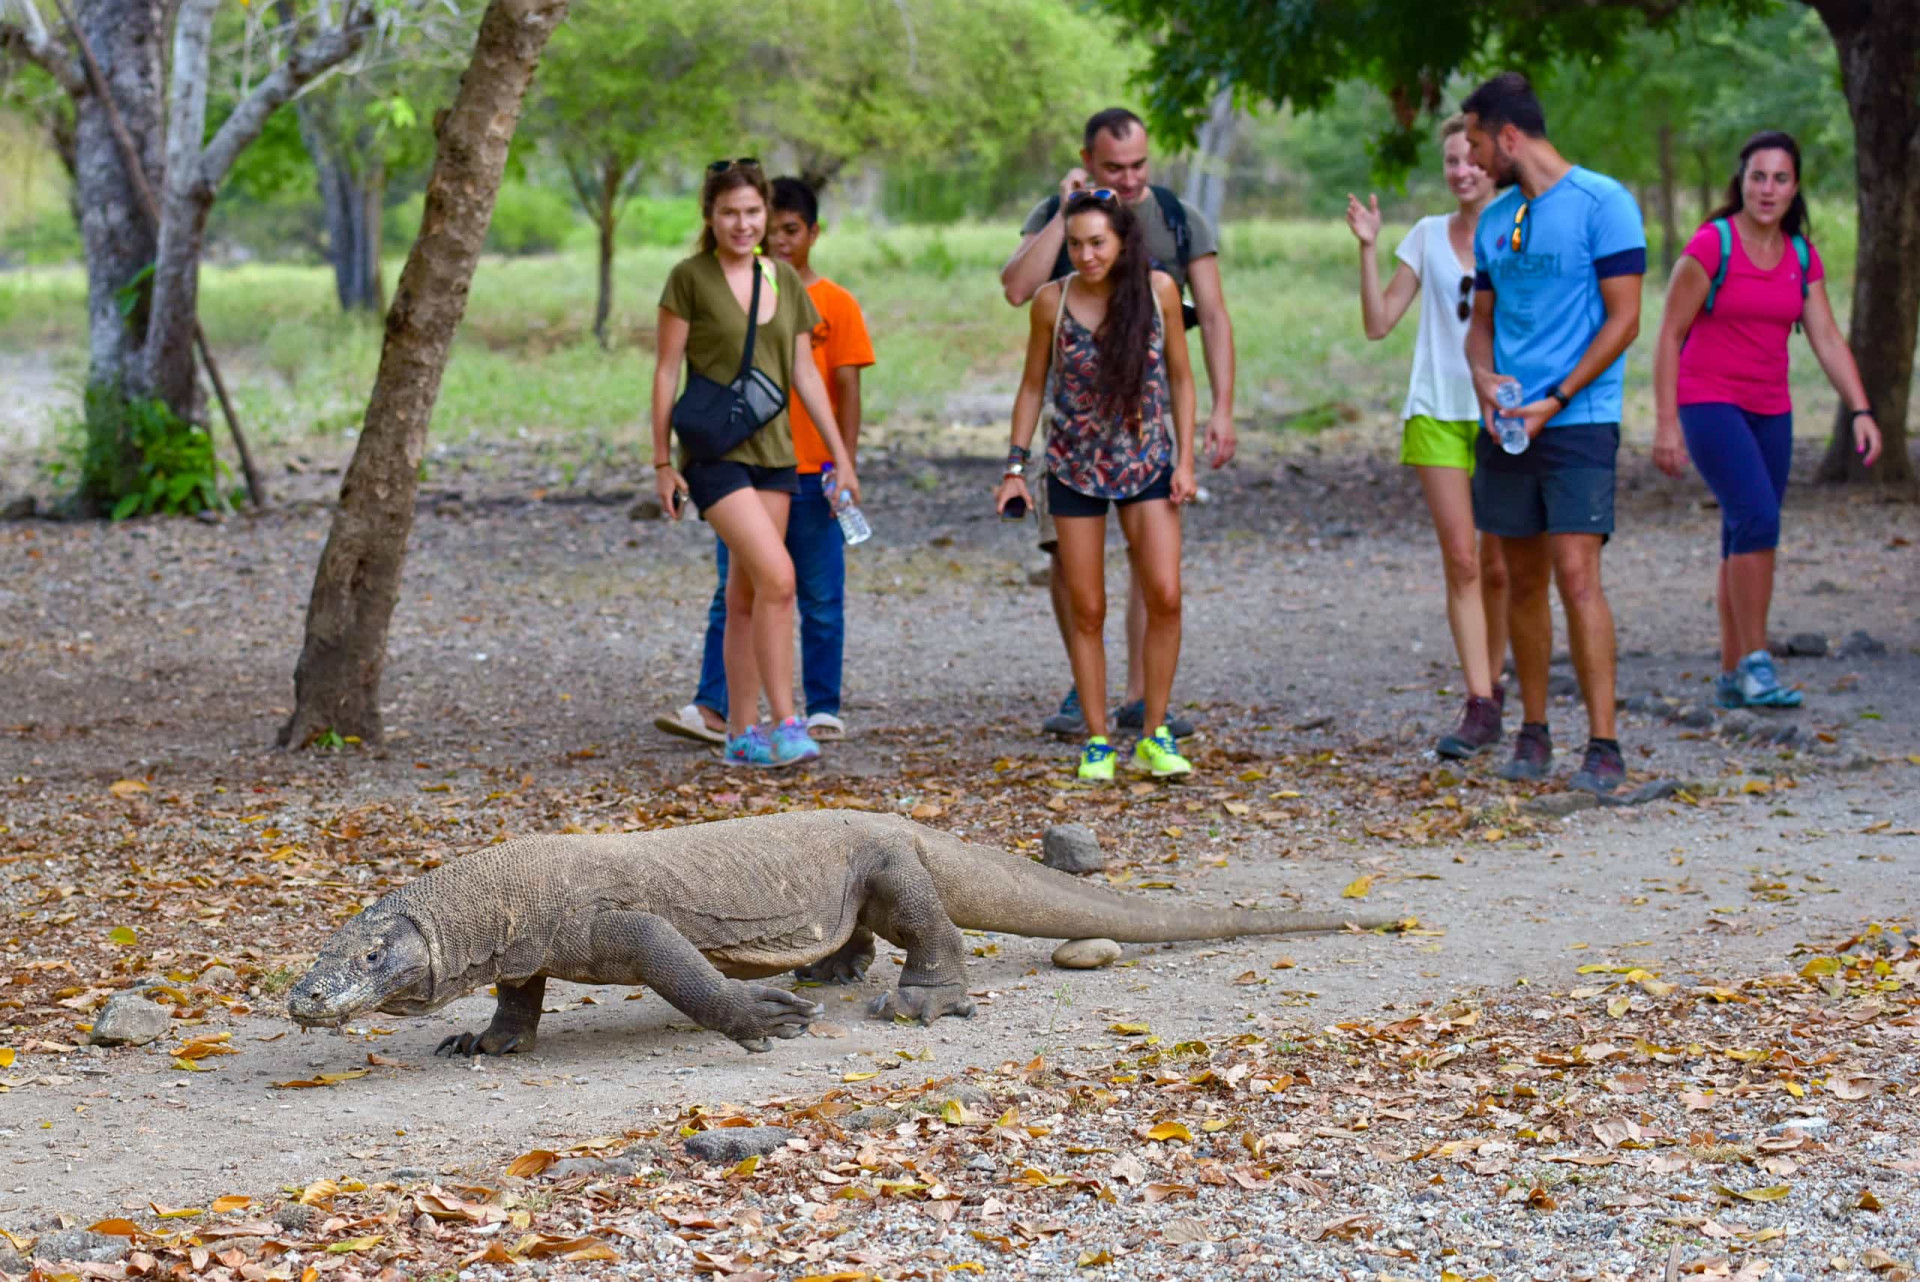 <p>In 2019, the Indonesian government announced the closure of Komodo Island, one of its most popular visitor destinations, for one year. Animal smugglers were blamed for threatening the island's wildlife, which includes the iconic Komodo dragon monitor lizard.</p><p><a href="https://www.msn.com/en-my/community/channel/vid-7xx8mnucu55yw63we9va2gwr7uihbxwc68fxqp25x6tg4ftibpra?cvid=94631541bc0f4f89bfd59158d696ad7e">Follow us and access great exclusive content every day</a></p>